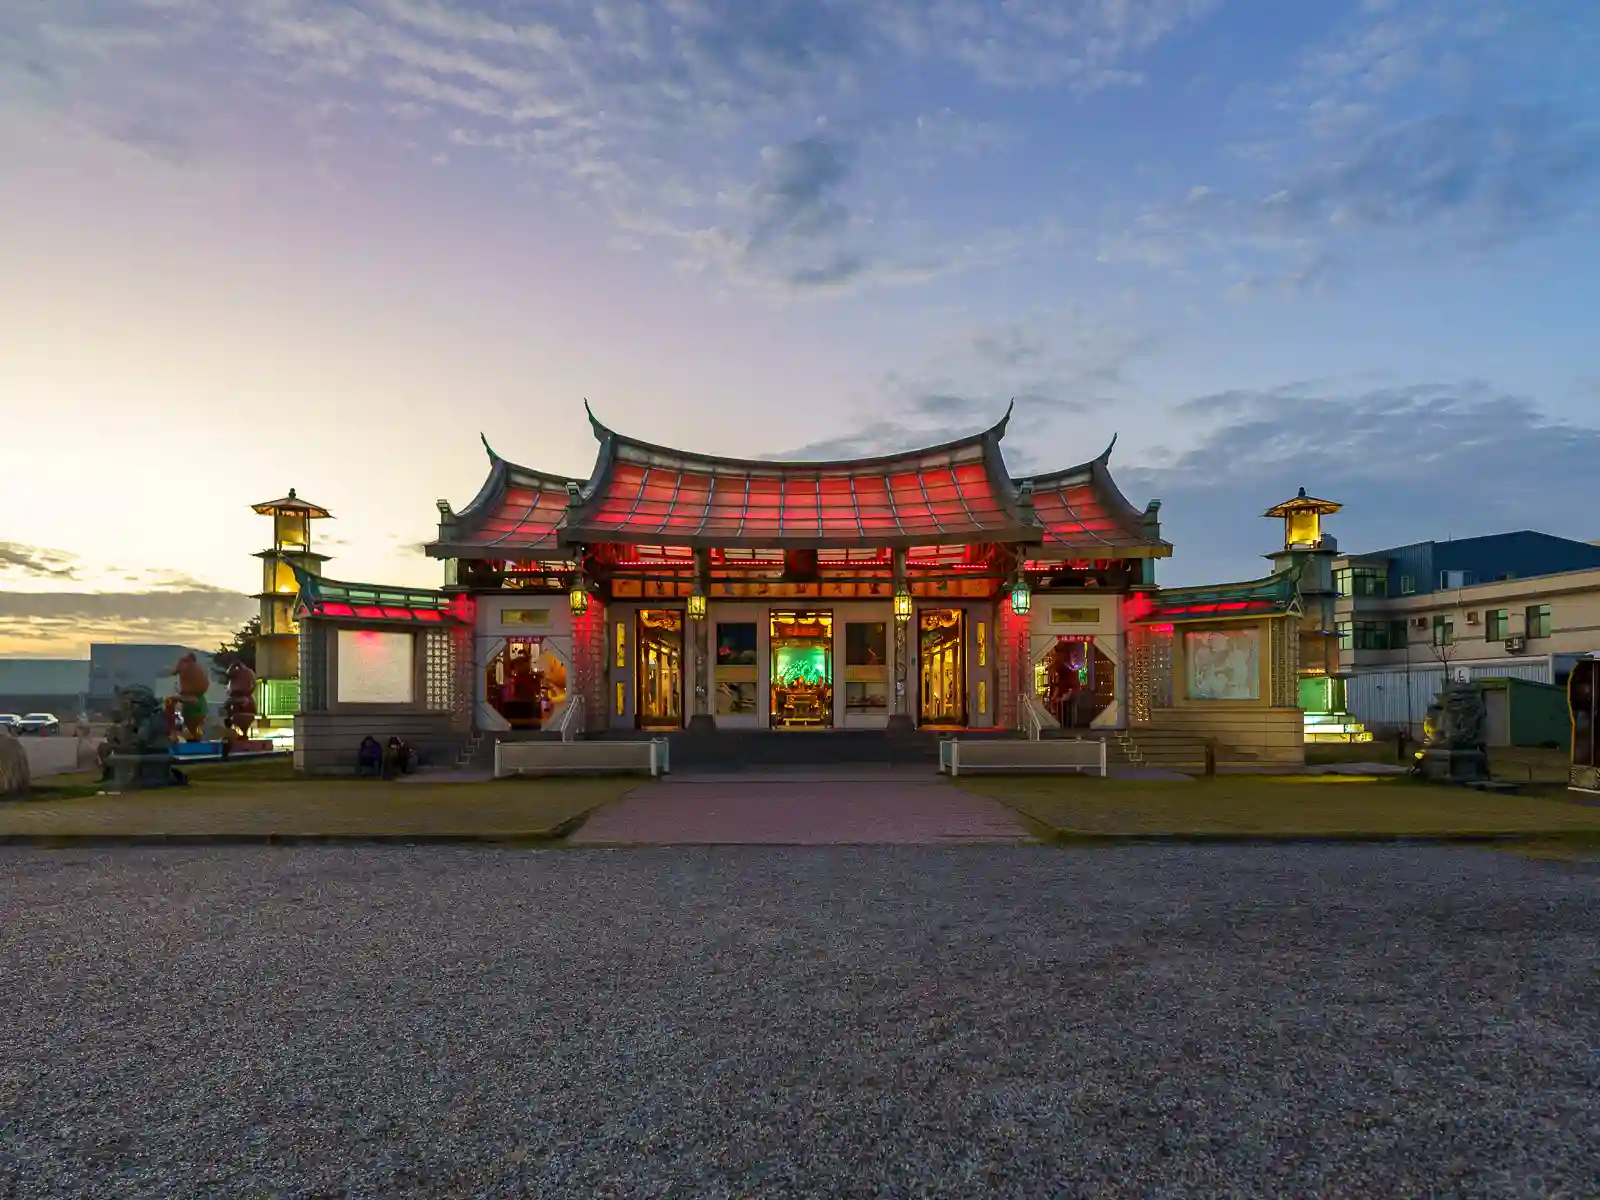 The sun sets over Lukang Glass Temple, which shines red from its own illumination.